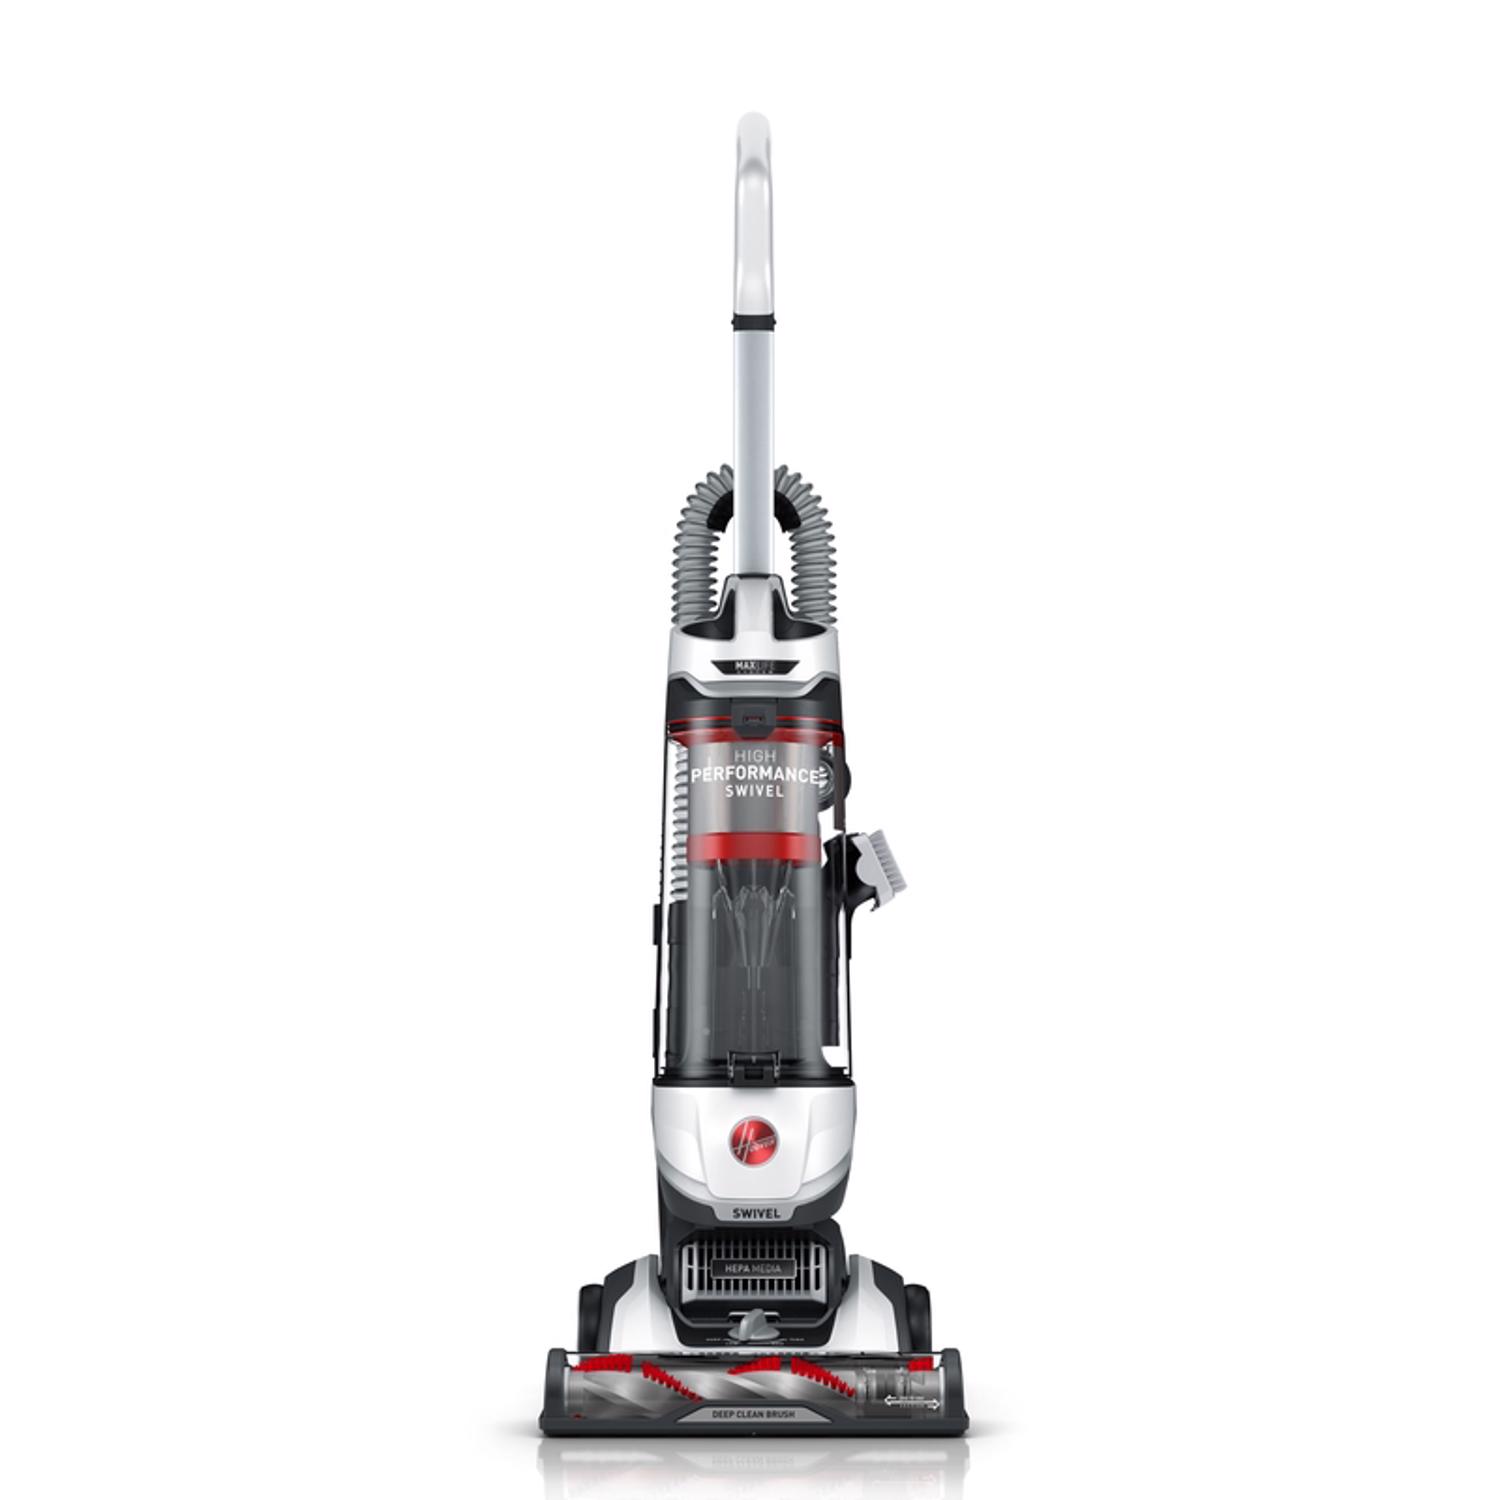 Photos - Vacuum Cleaner Hoover High Performance Bagless Corded HEPA Filter Upright Vacuum UH75100V 